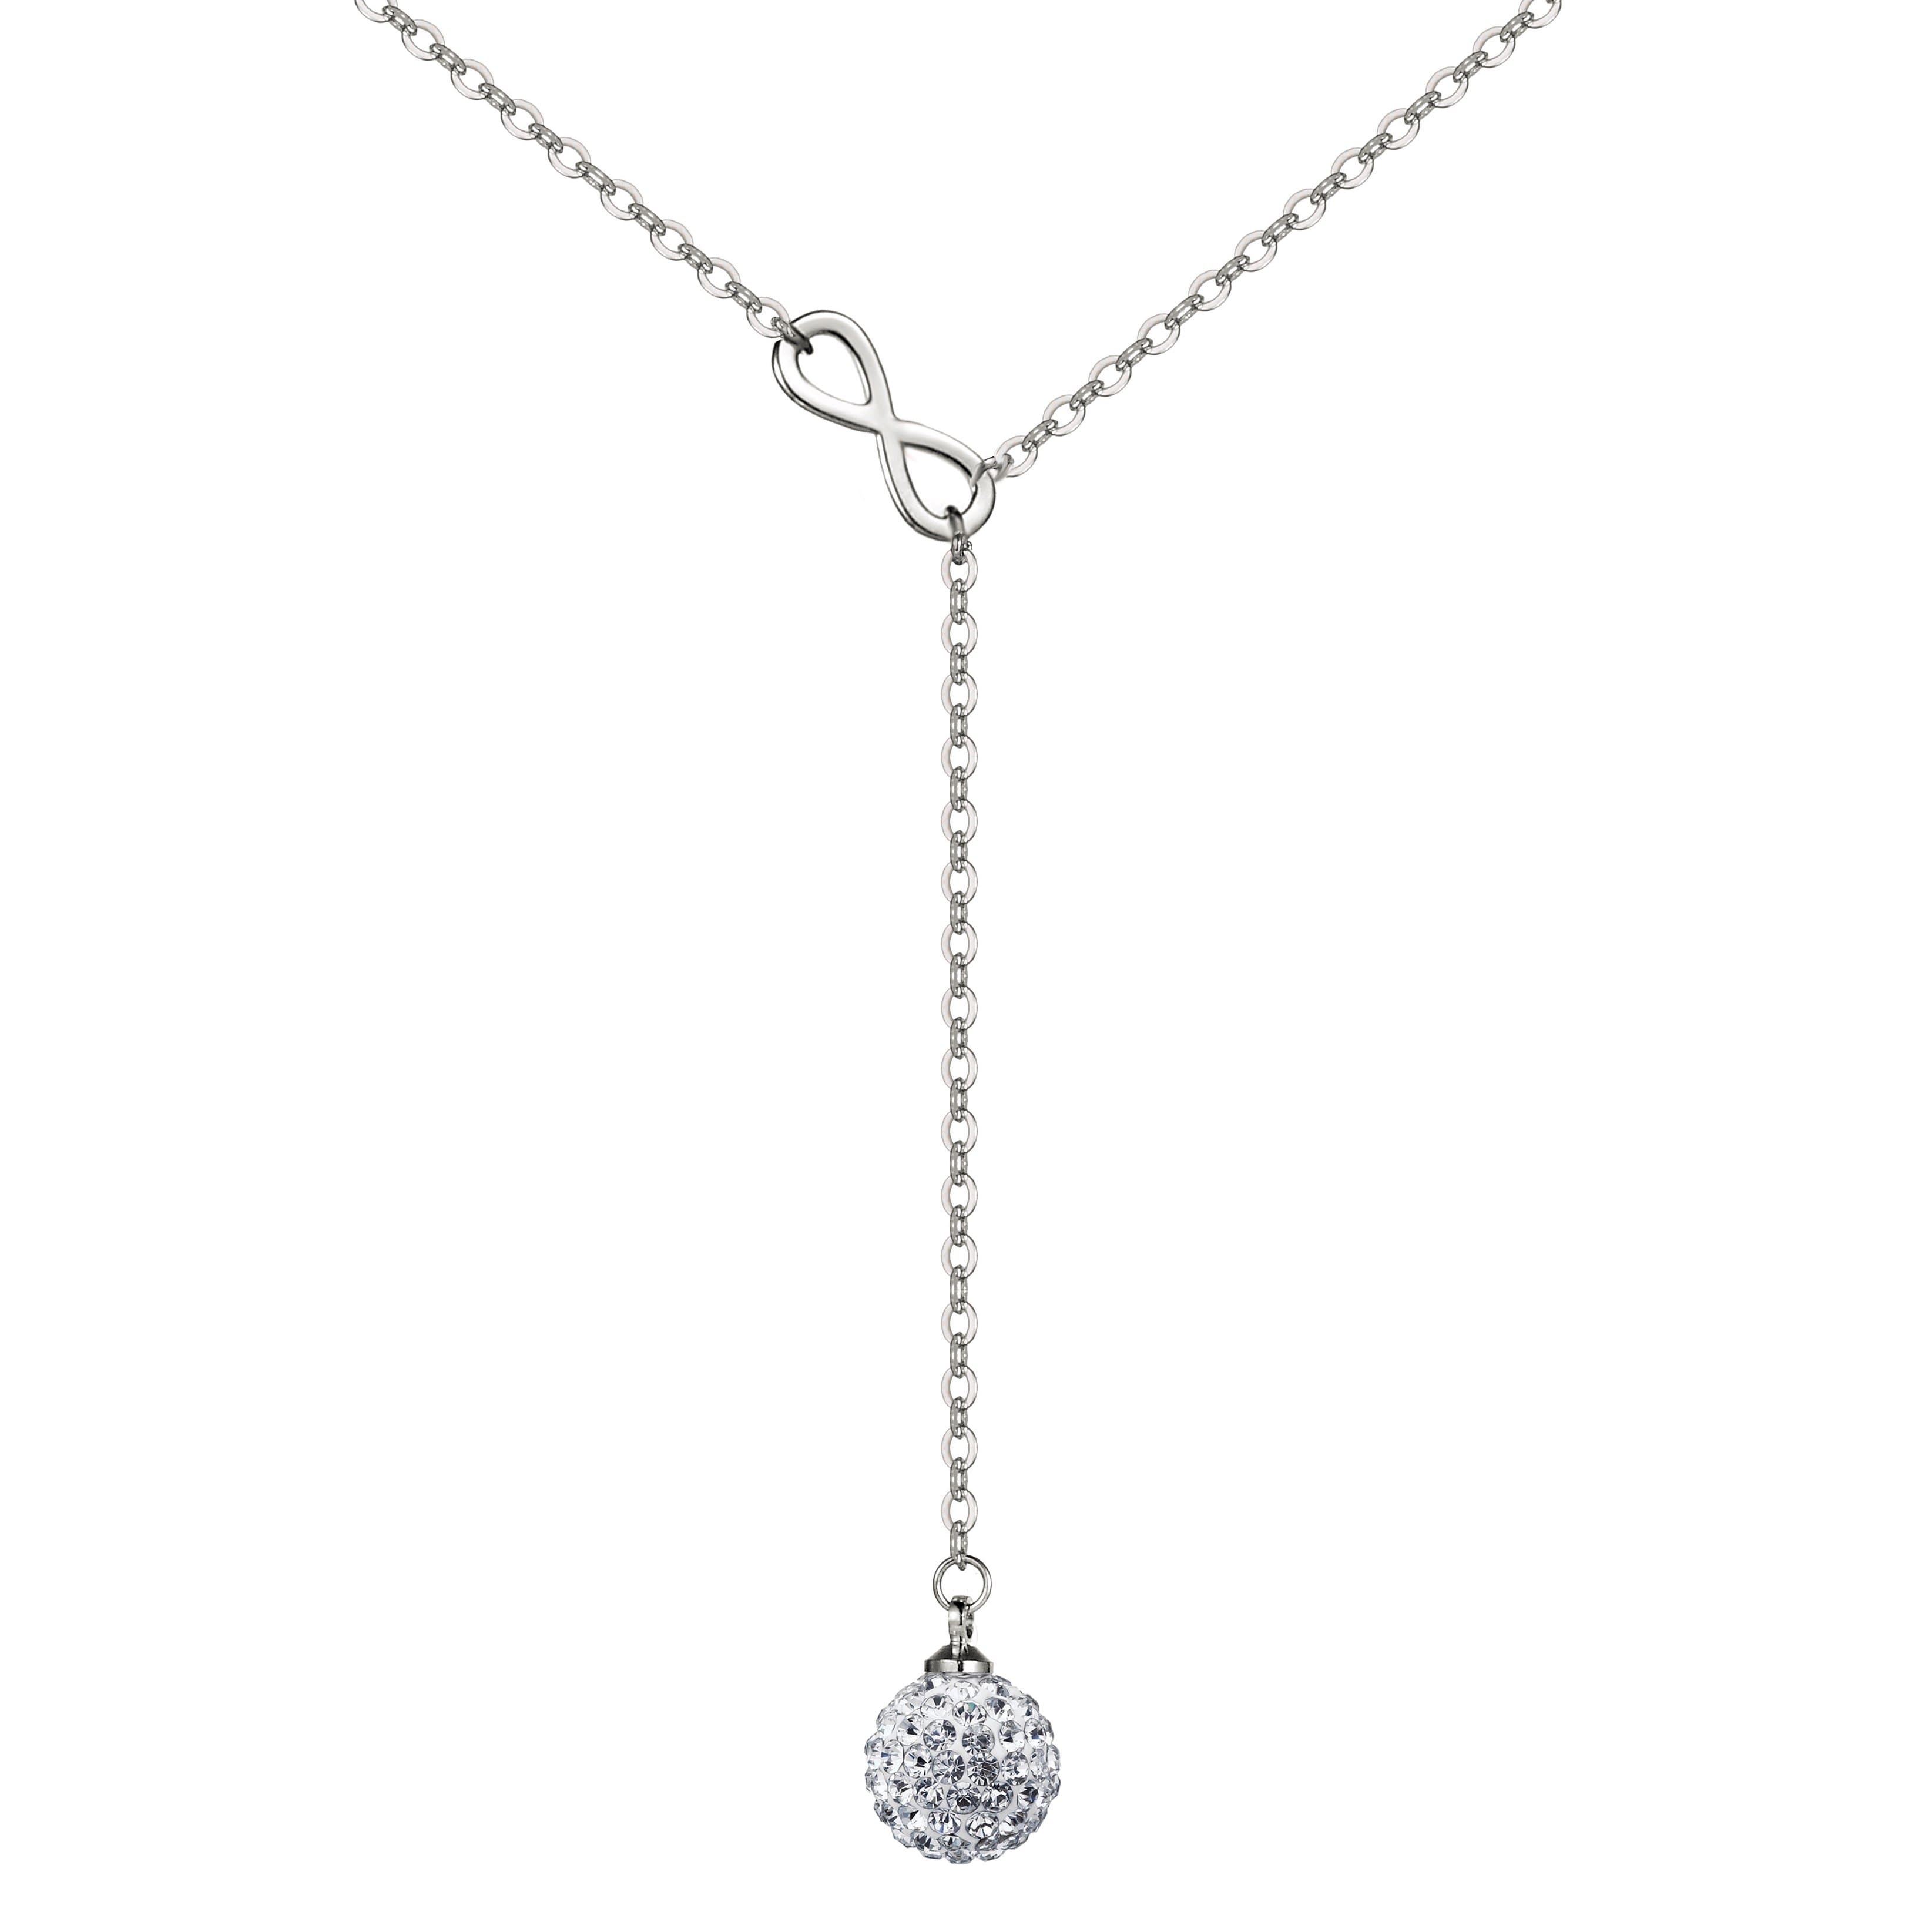 Silver Plated Infinity Necklace Created with Zircondia® Crystals by Philip Jones Jewellery